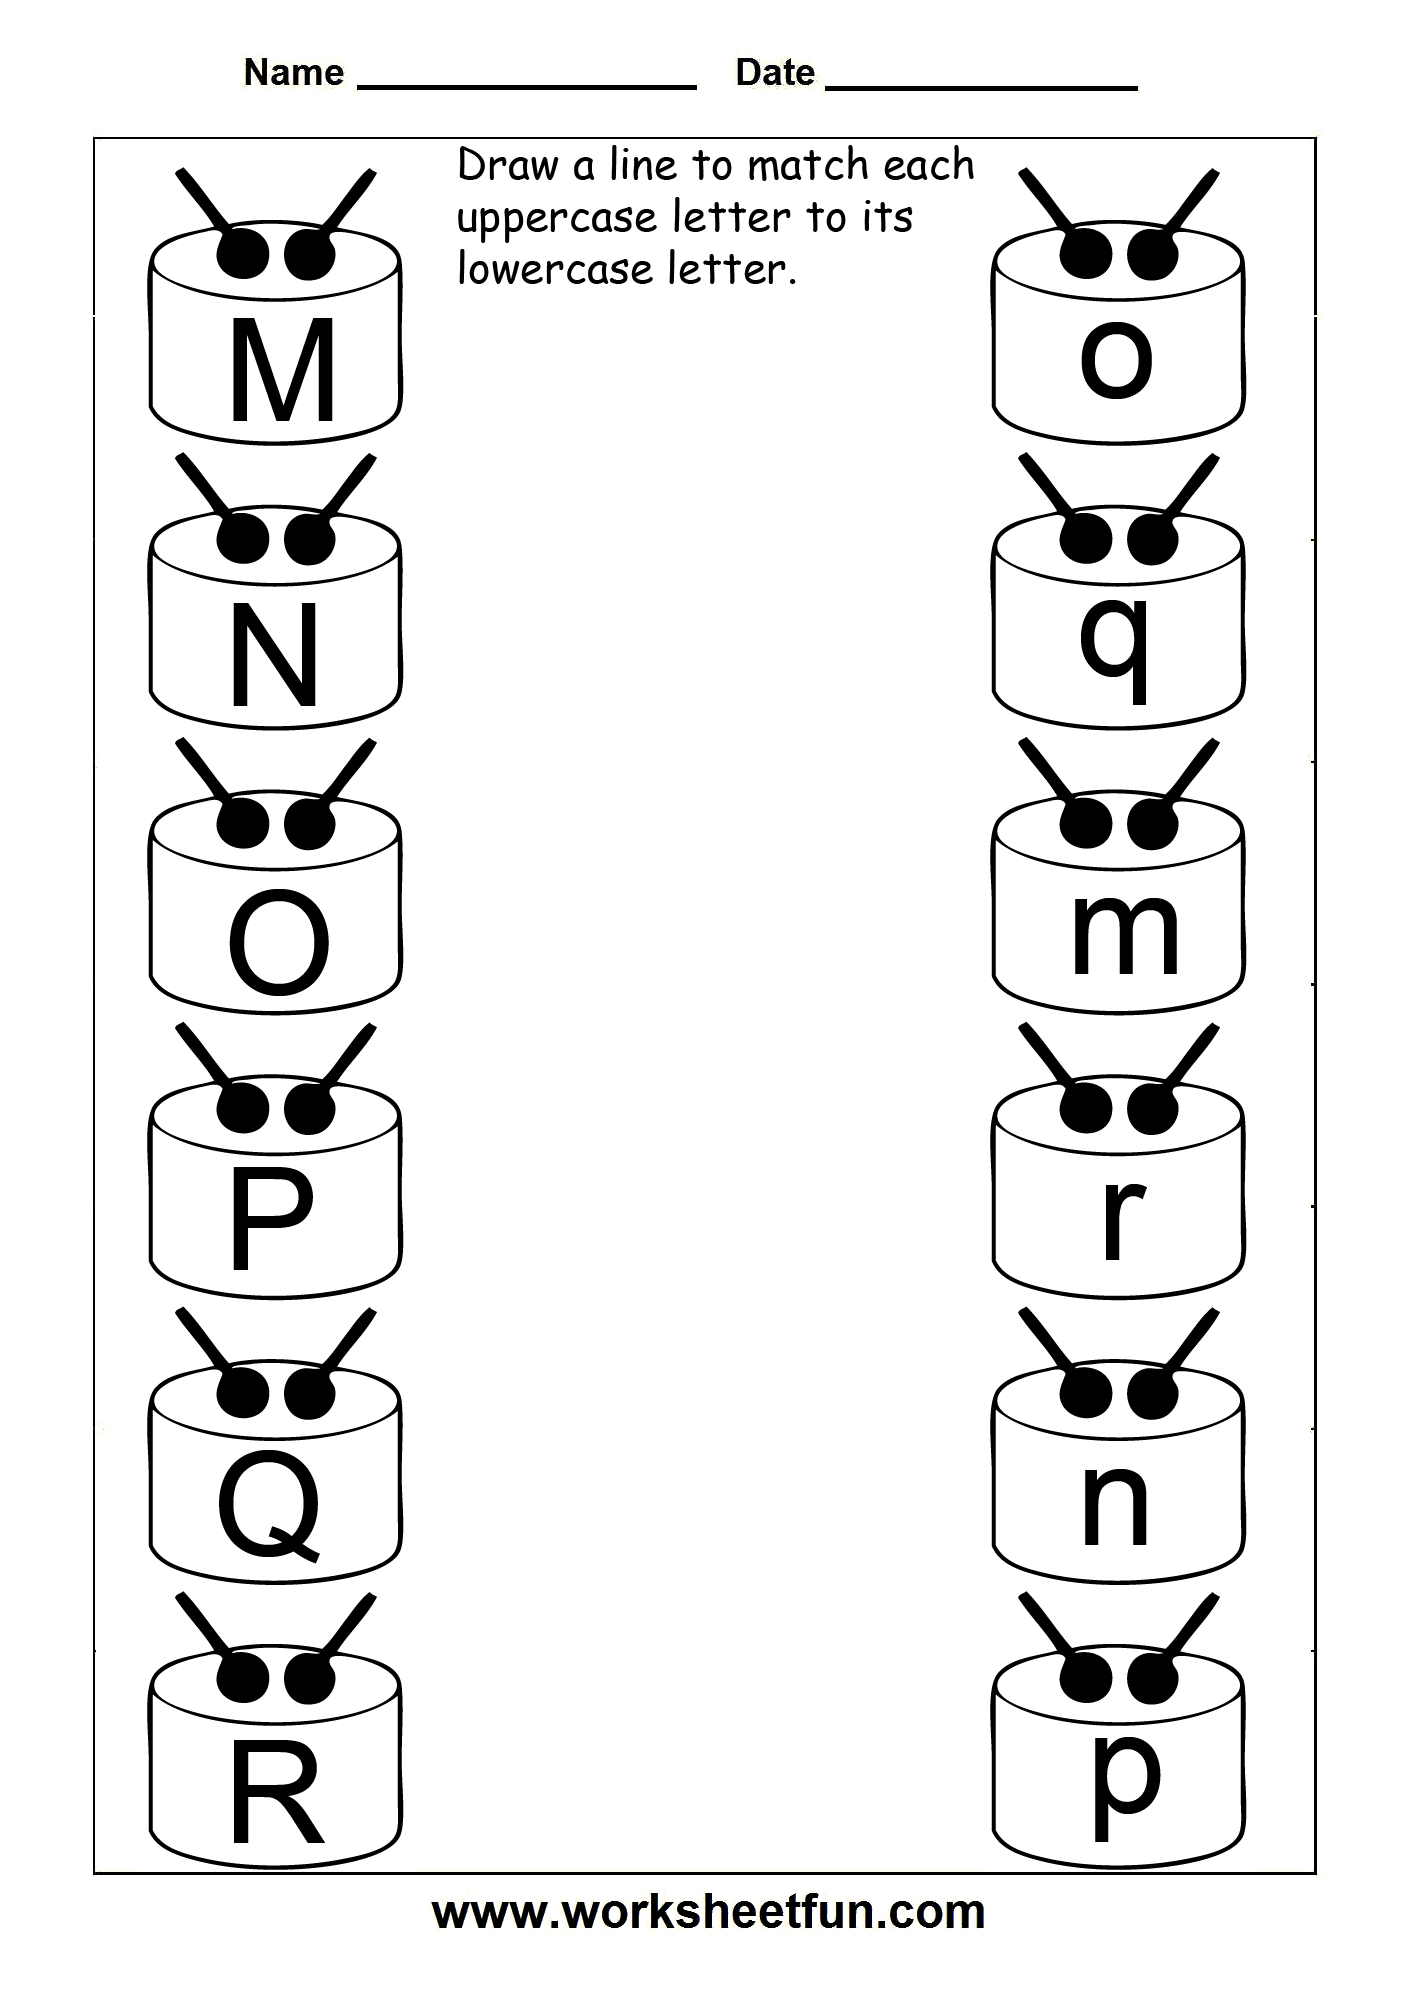 Matching Uppercase and Lowercase Letter Worksheets Image